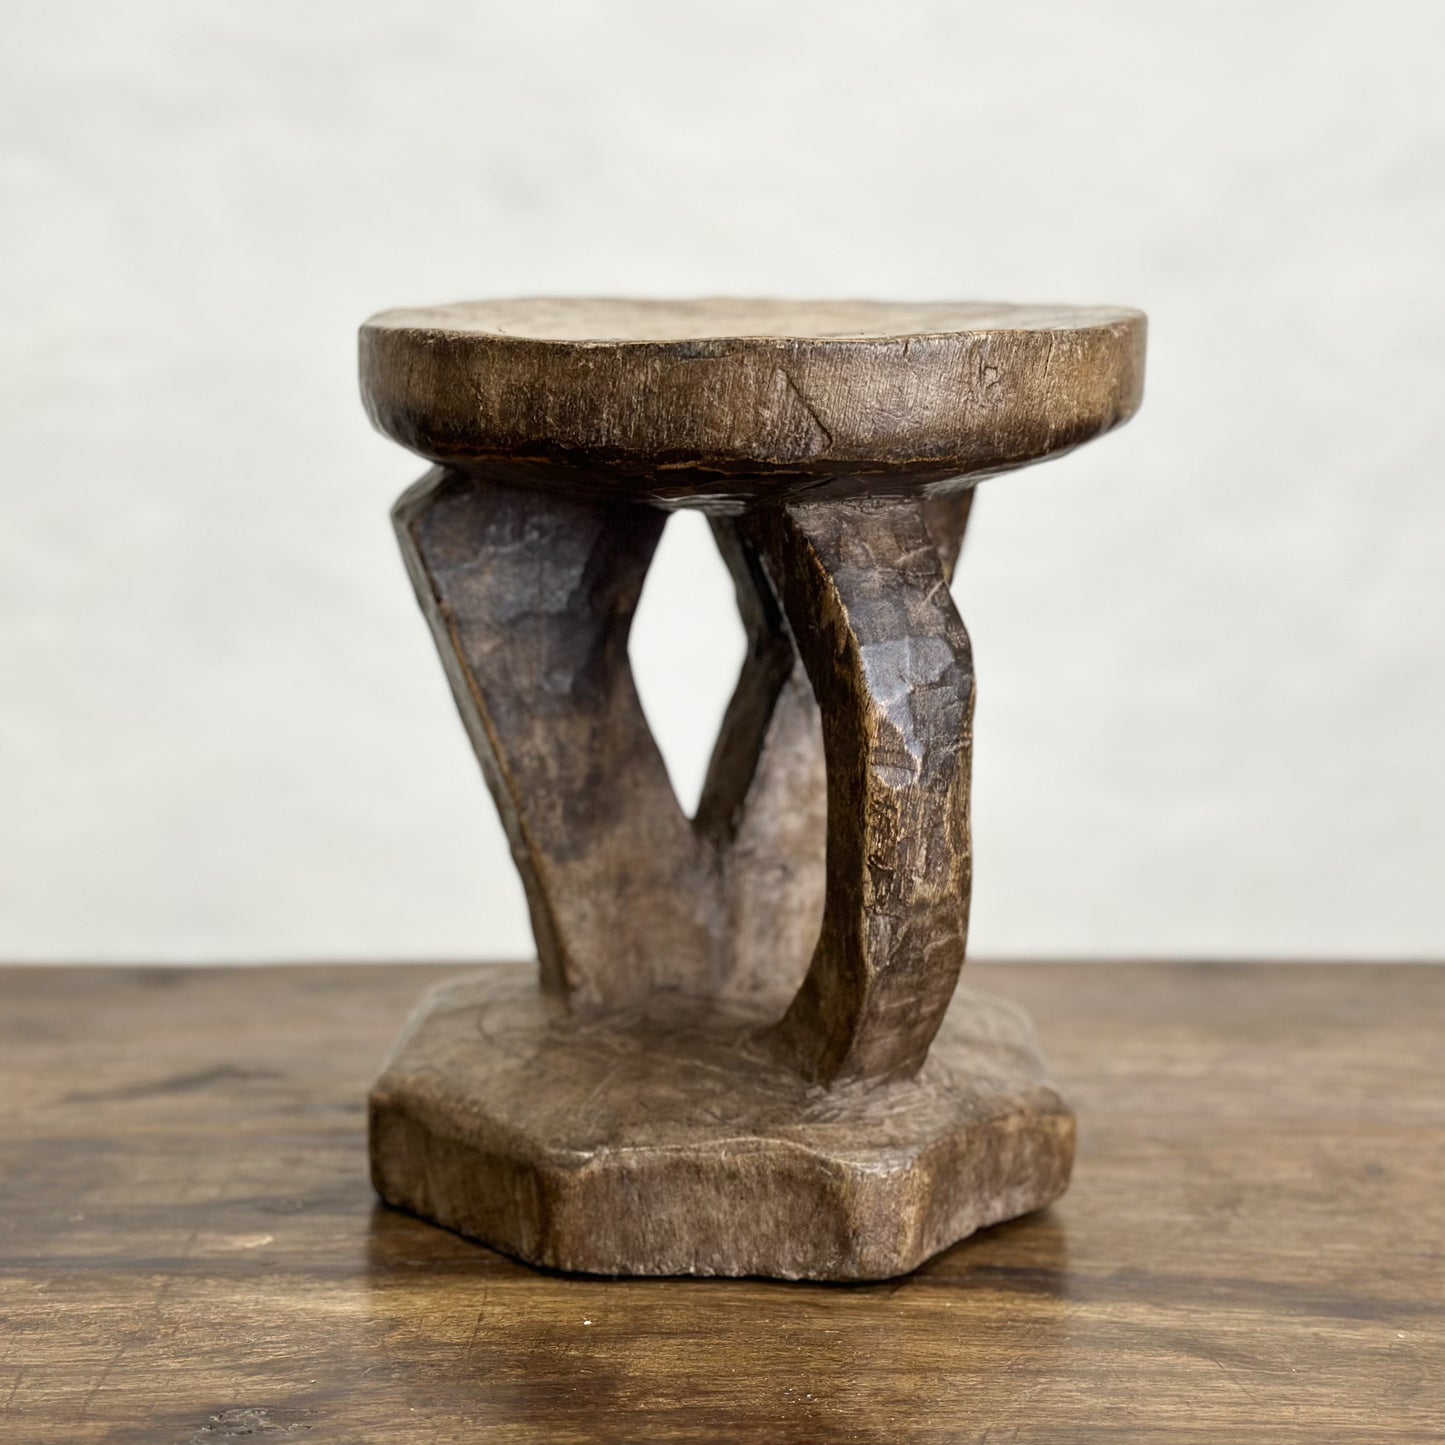 Carved-Timber-Tonga-Stool-Pedestal-Wooden-Africa-African-Zambia